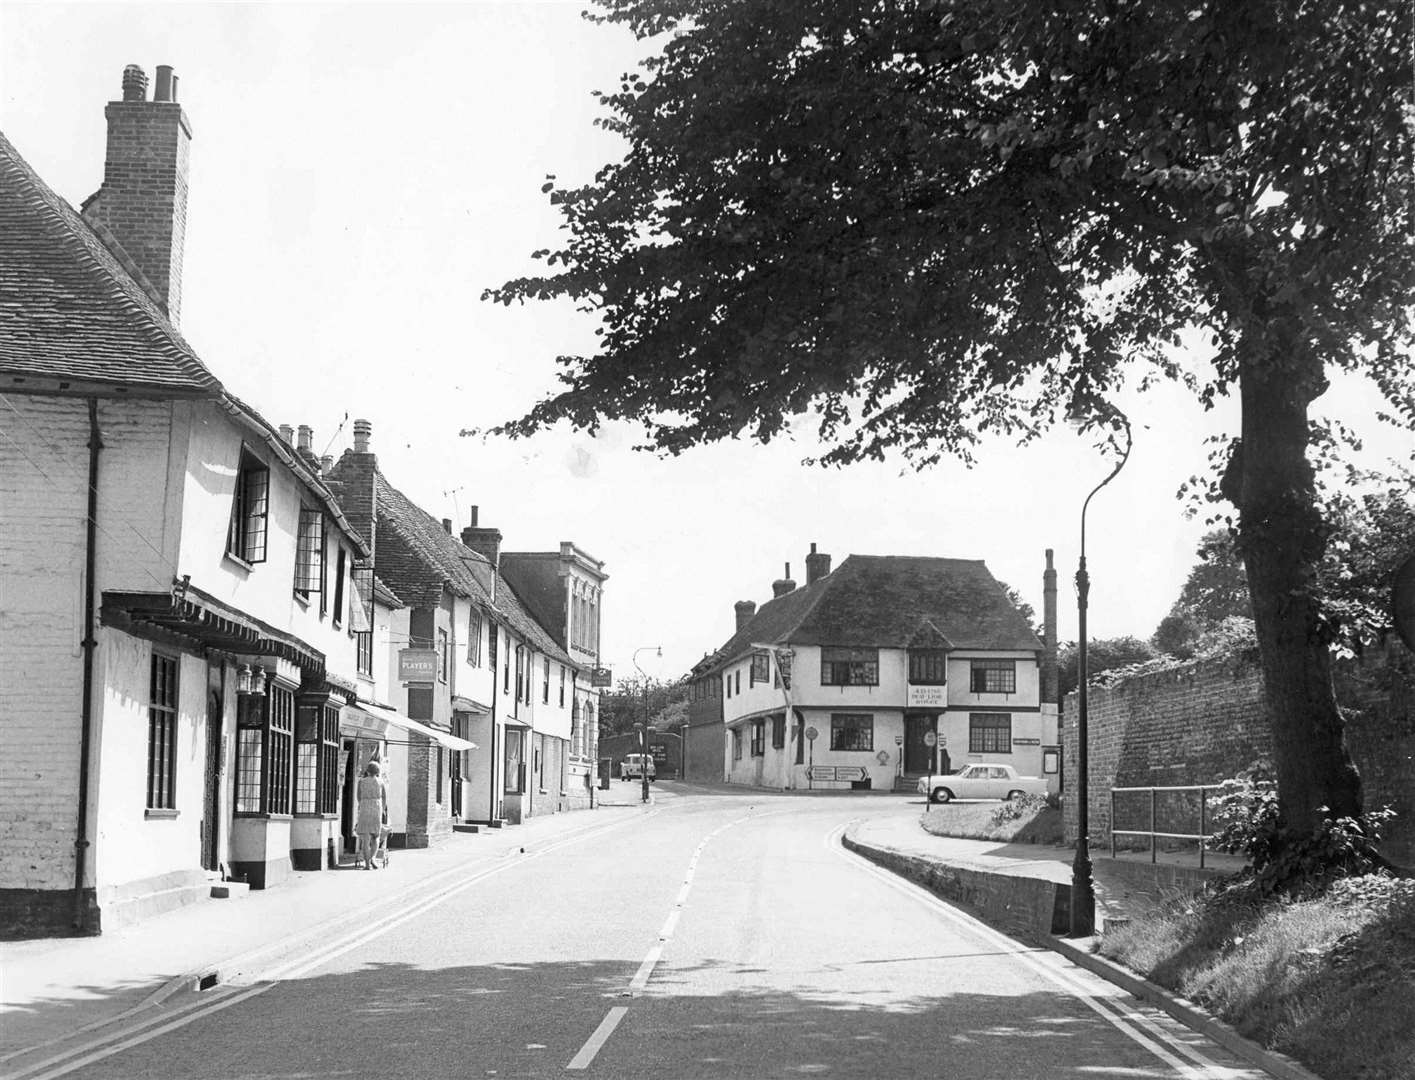 The Red Lion Hotel in Wingham pictured in 1968